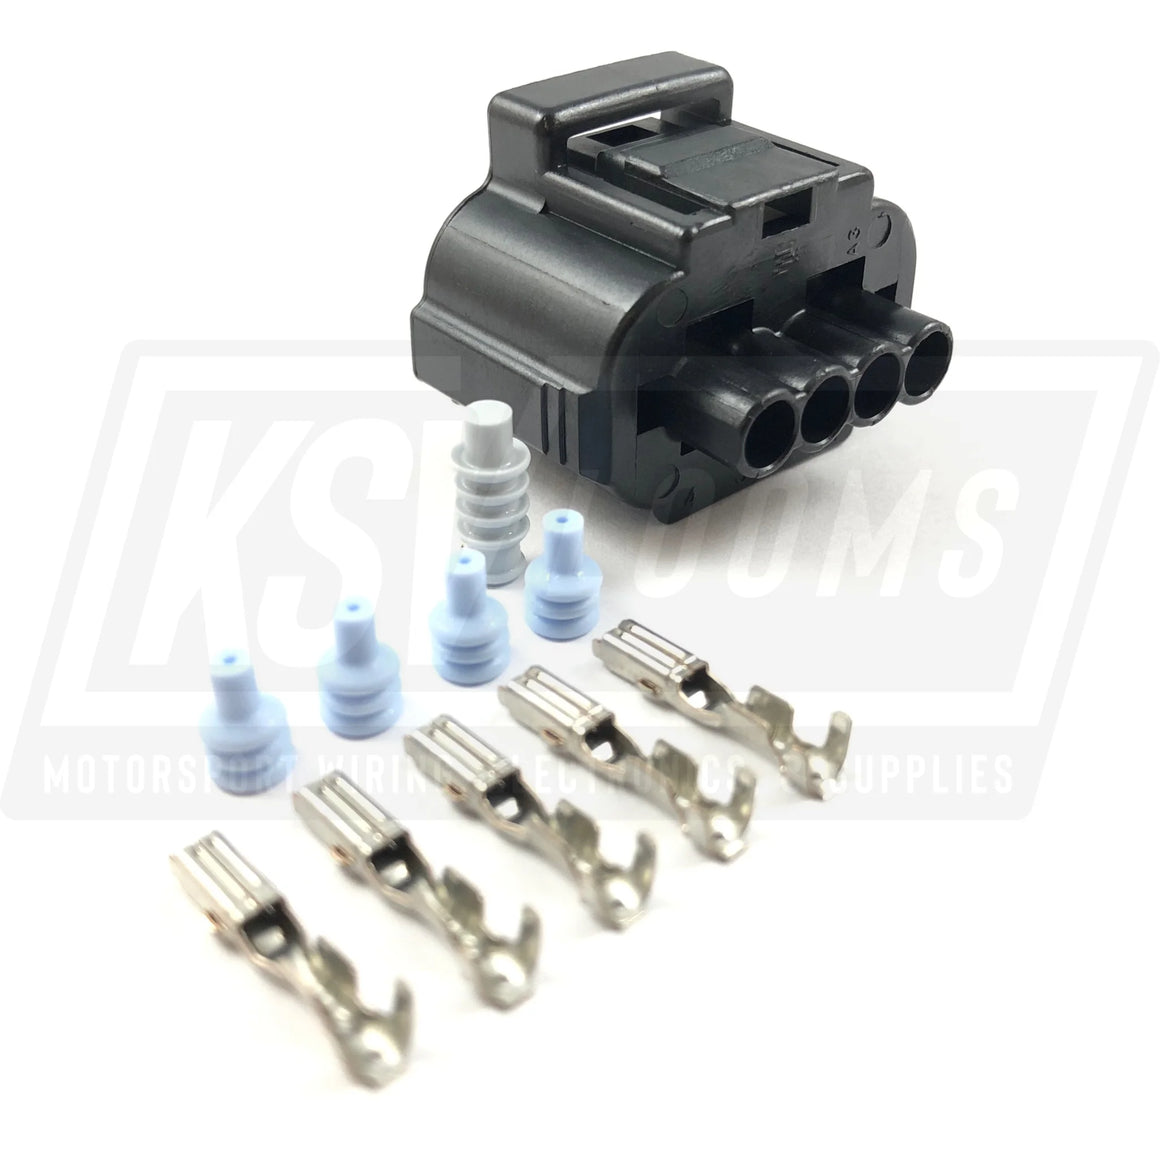 4-Way Connector Kit For Lexus Is300 2Jz-Ge Throttle Position Sensor Tps (22-18 Awg)